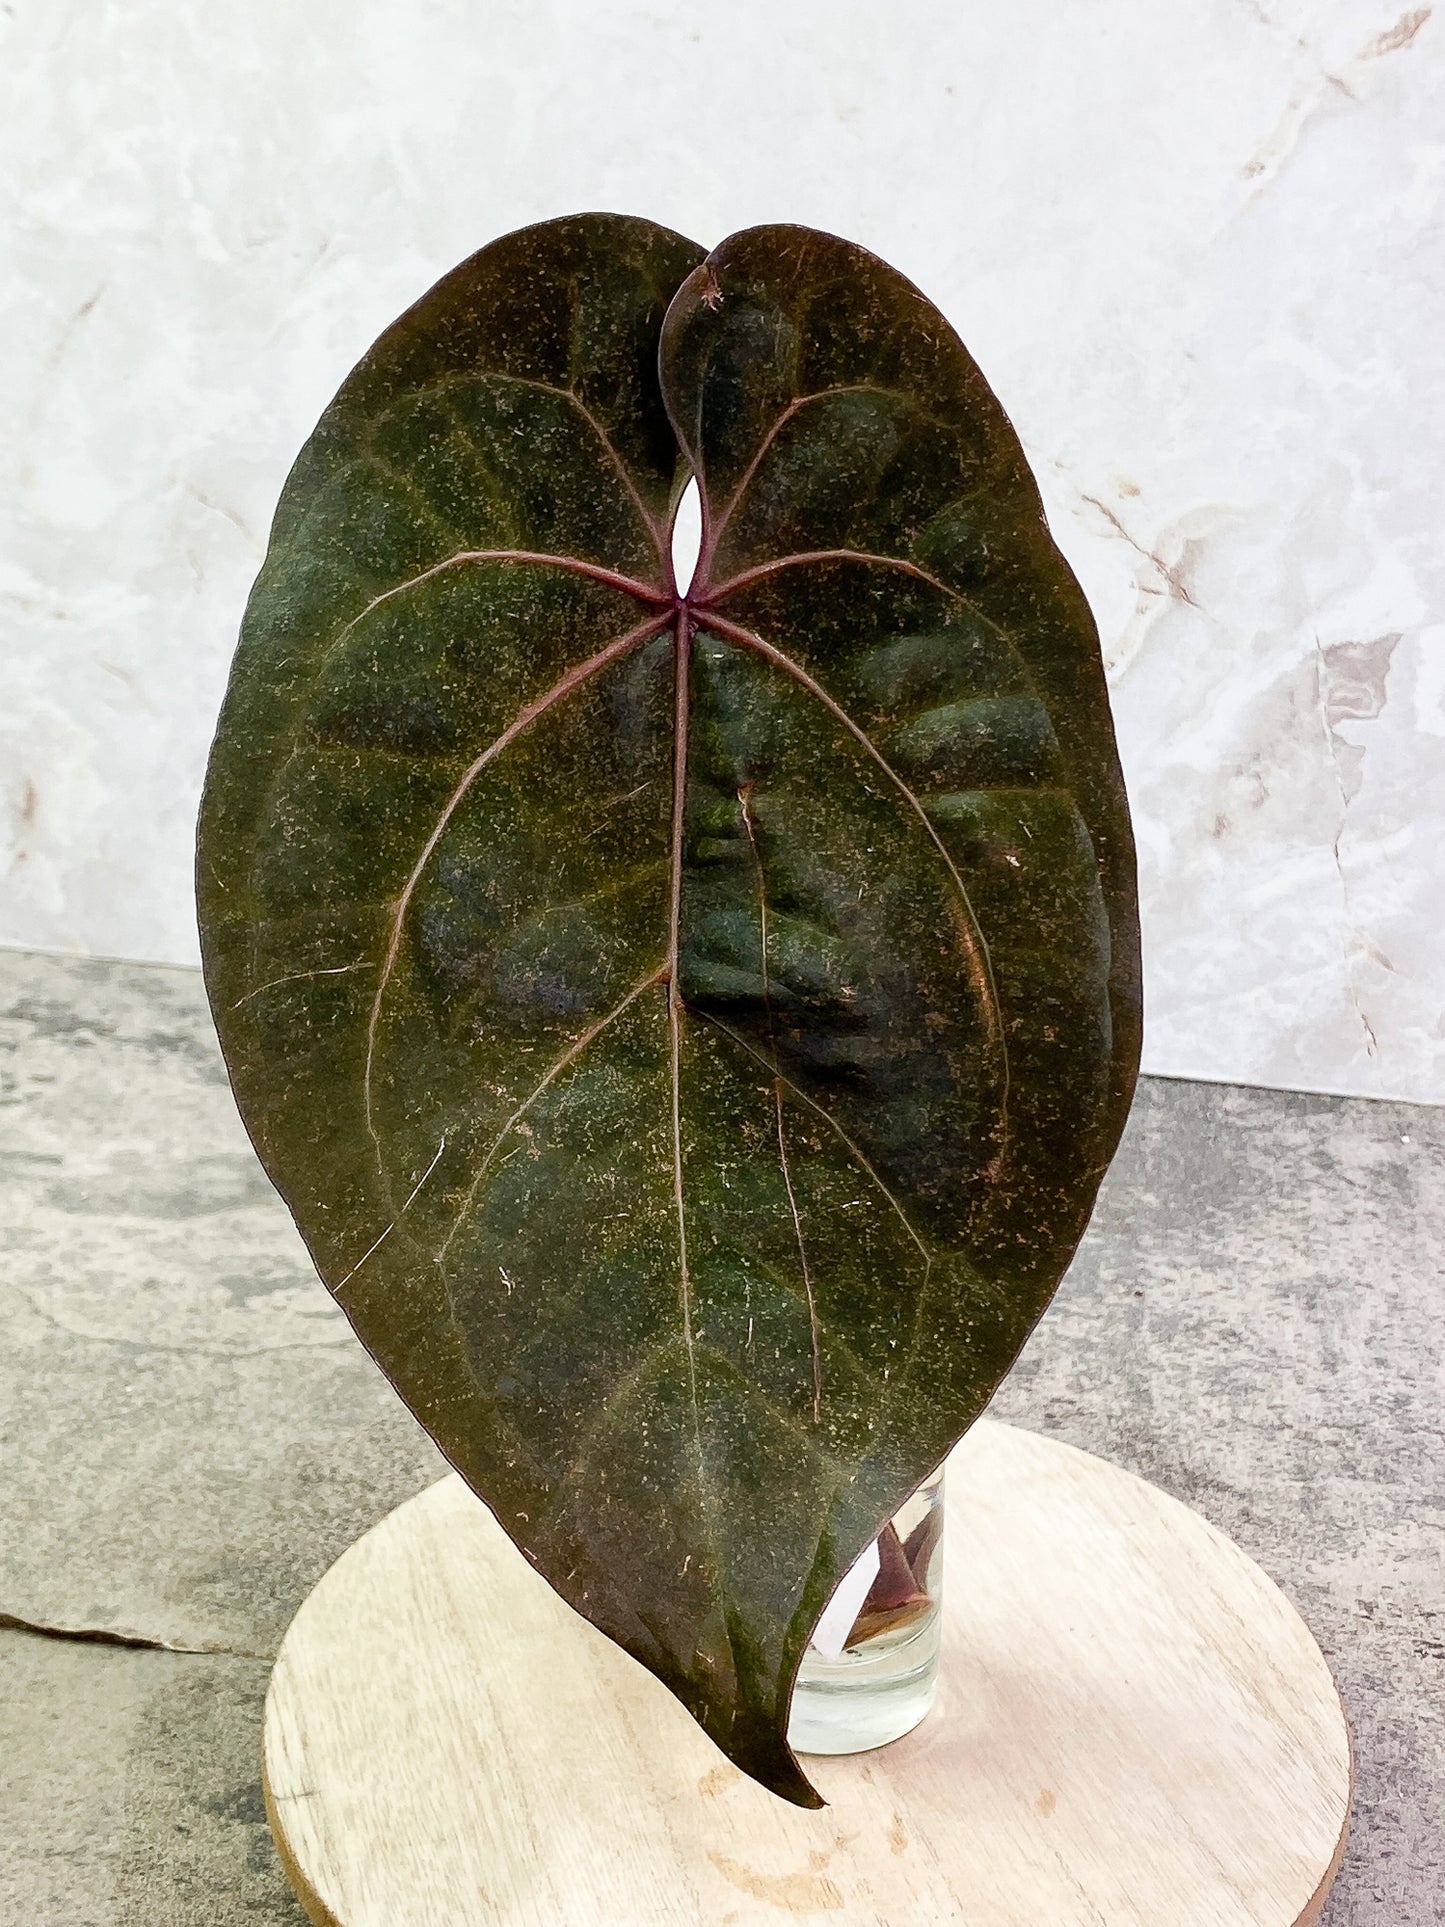 ANTHURIUM ACE OF SPADES 1 leaf 1 sprout Rooting